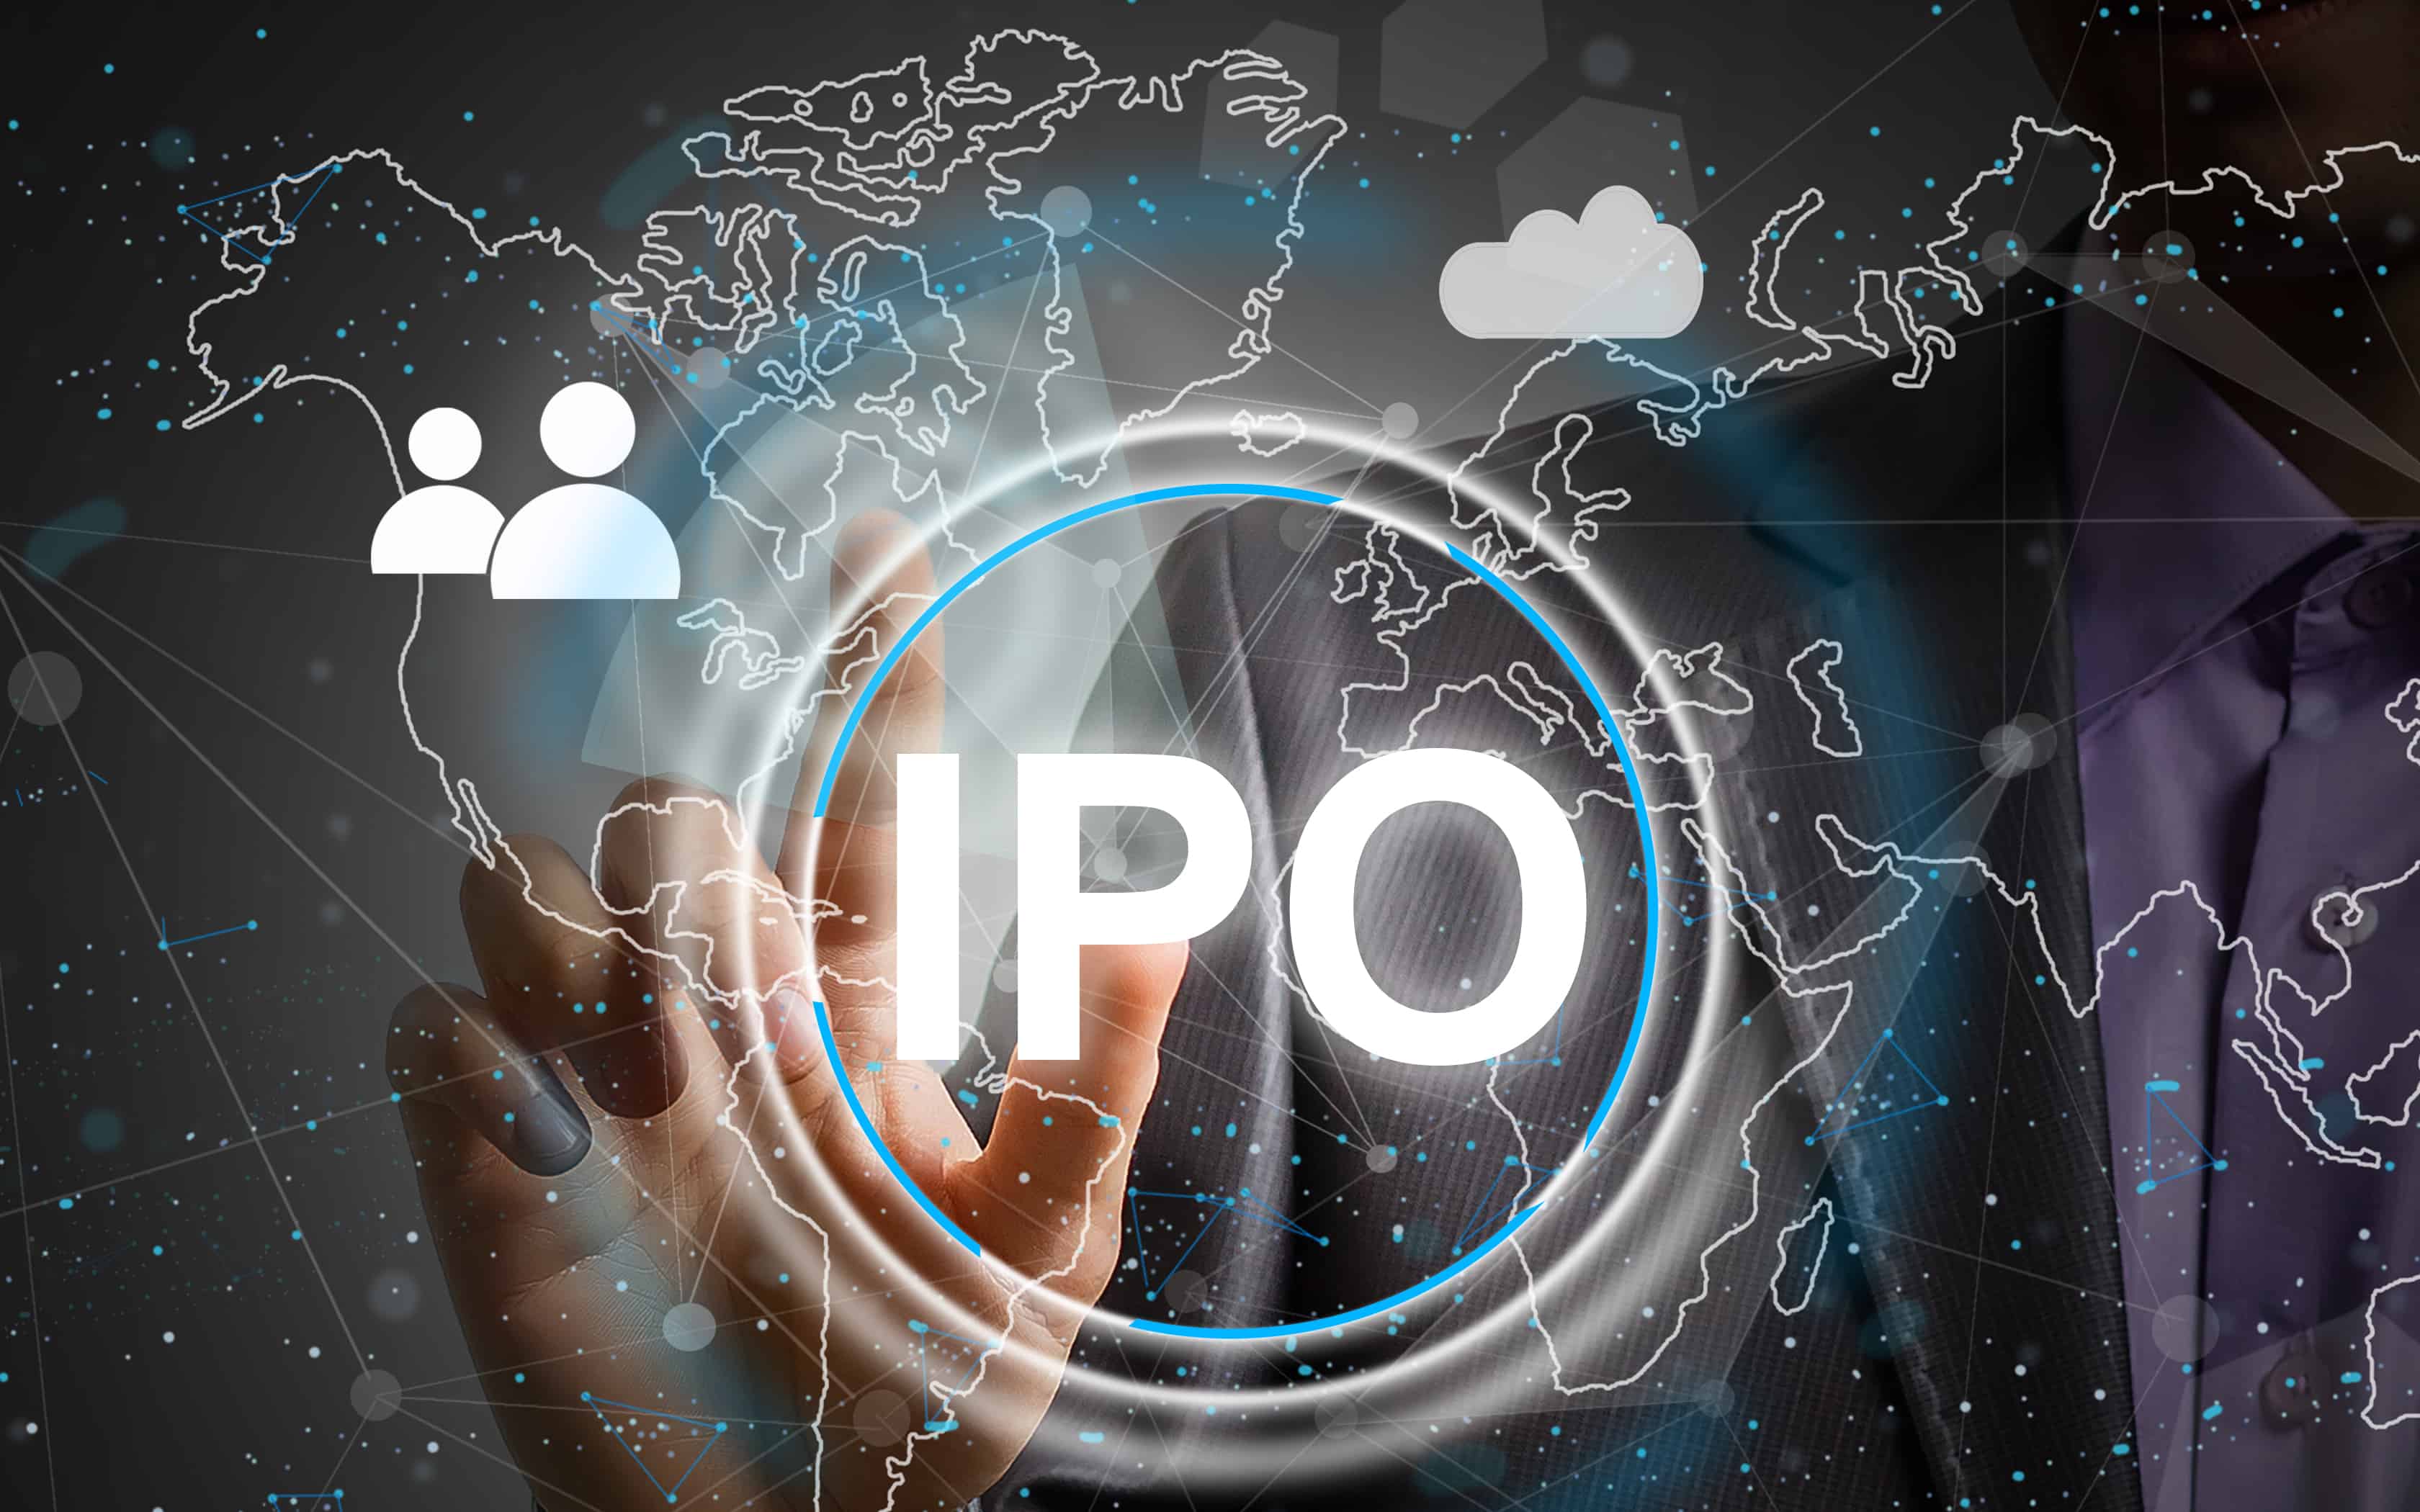 Aspire & Innovative's IPO sees a promising start with a 2.07x subscription on Day 1, showing a cautiously optimistic market response to their debut